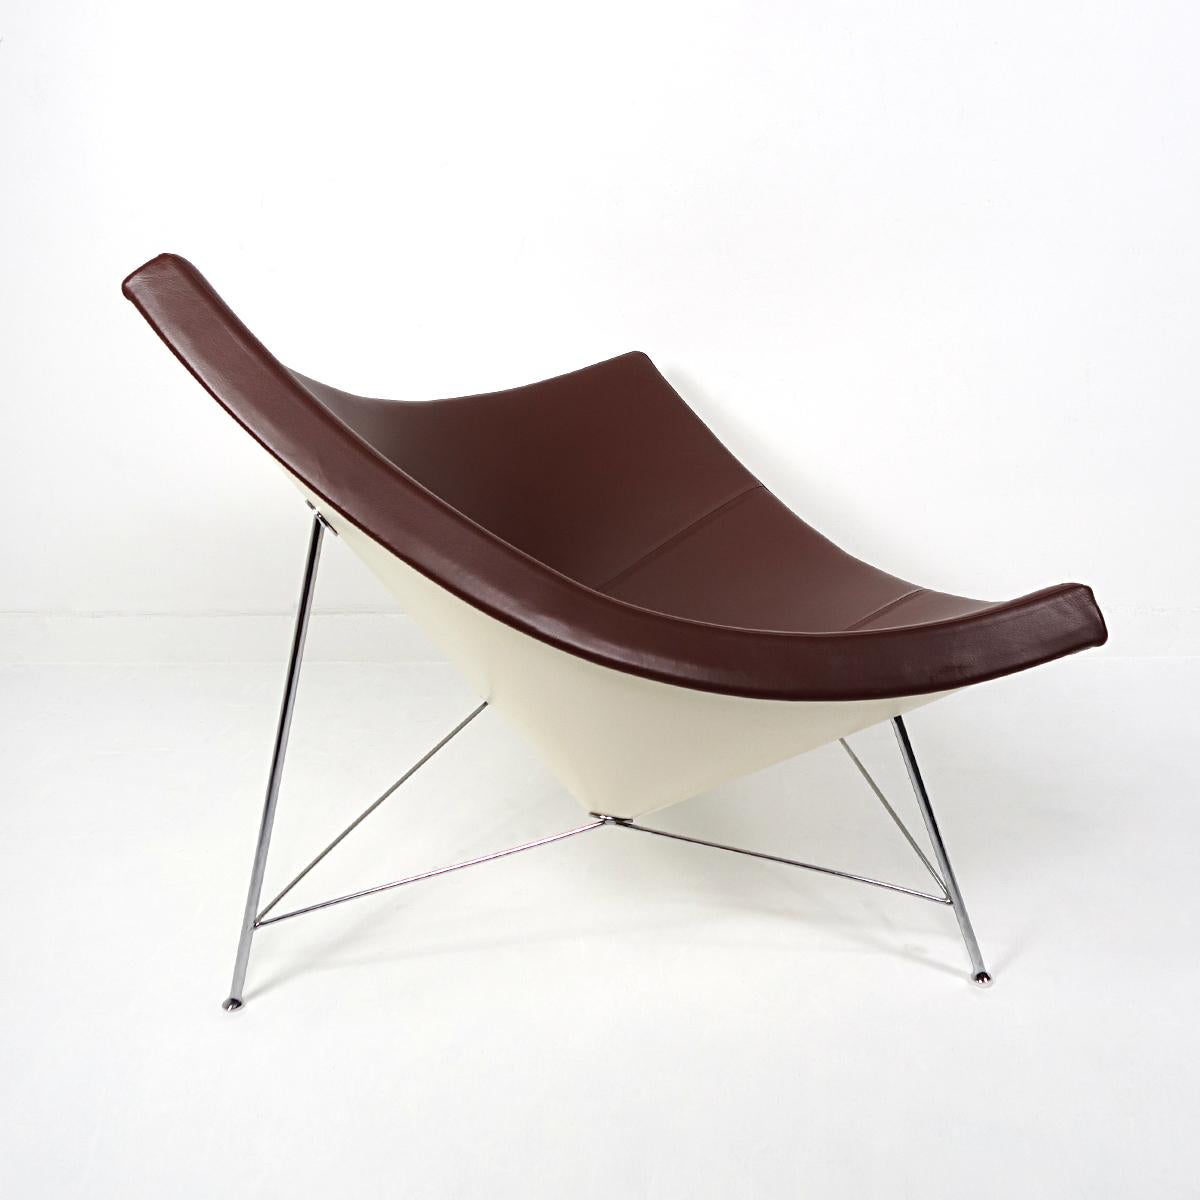 American Mid-Century Modern Brown Leather Coconut Chair by George Nelson for Vitra For Sale